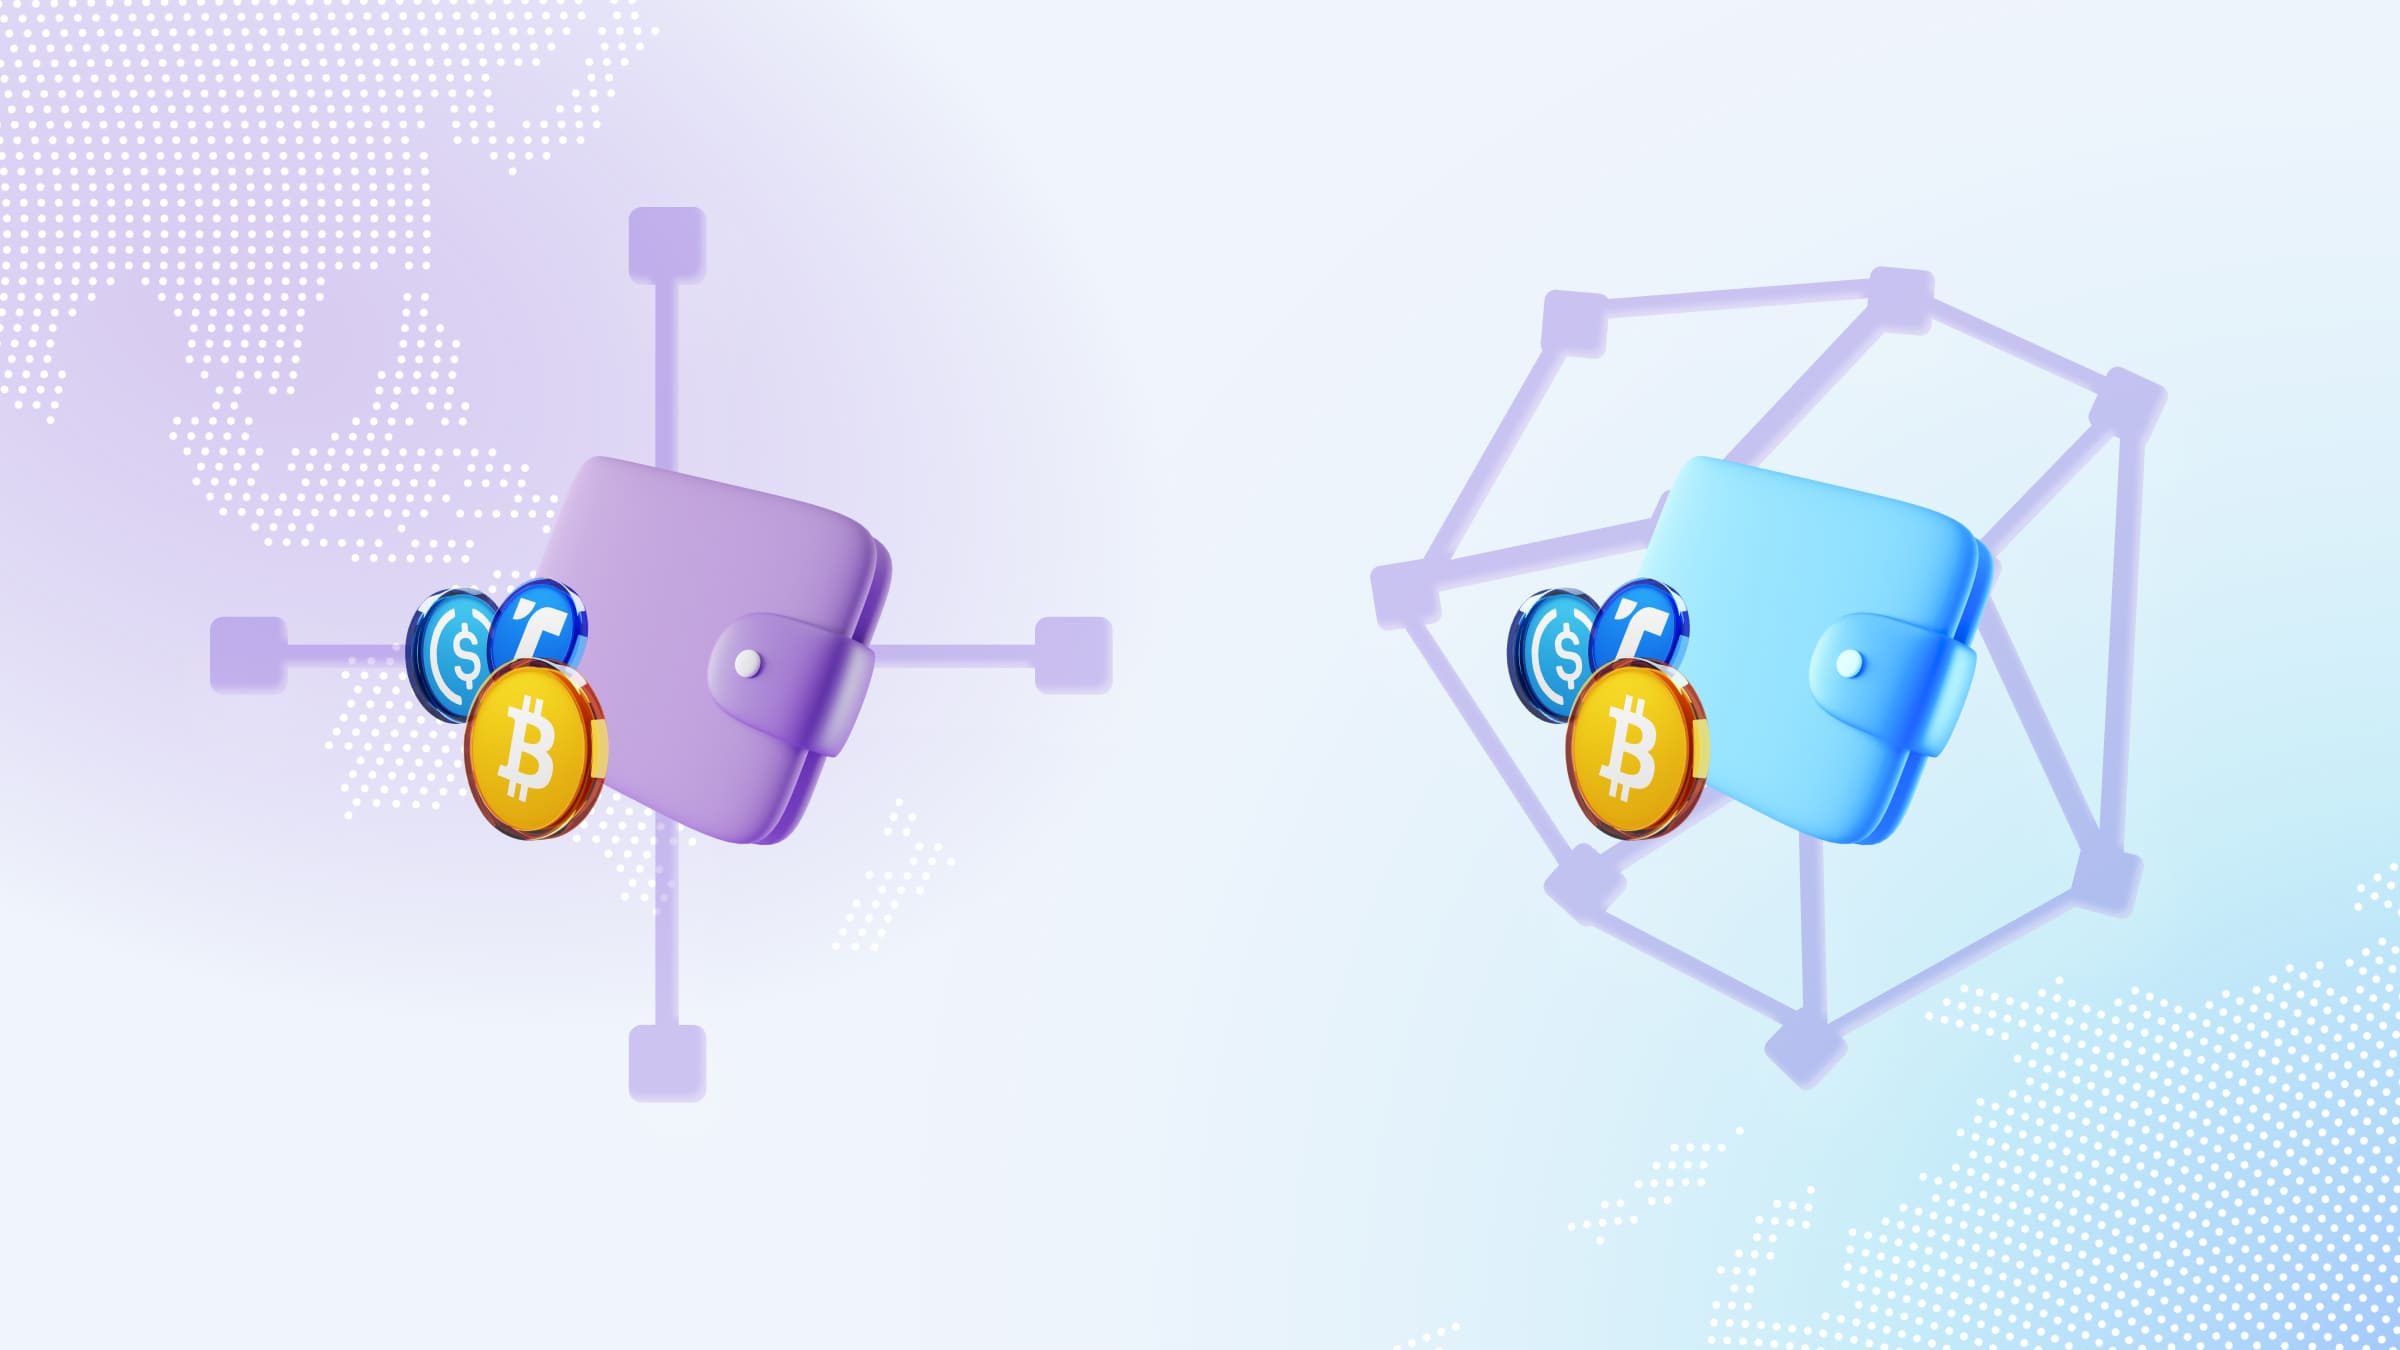 Cryptocurrency wallets are divided into two main kinds: centralized and decentralized.